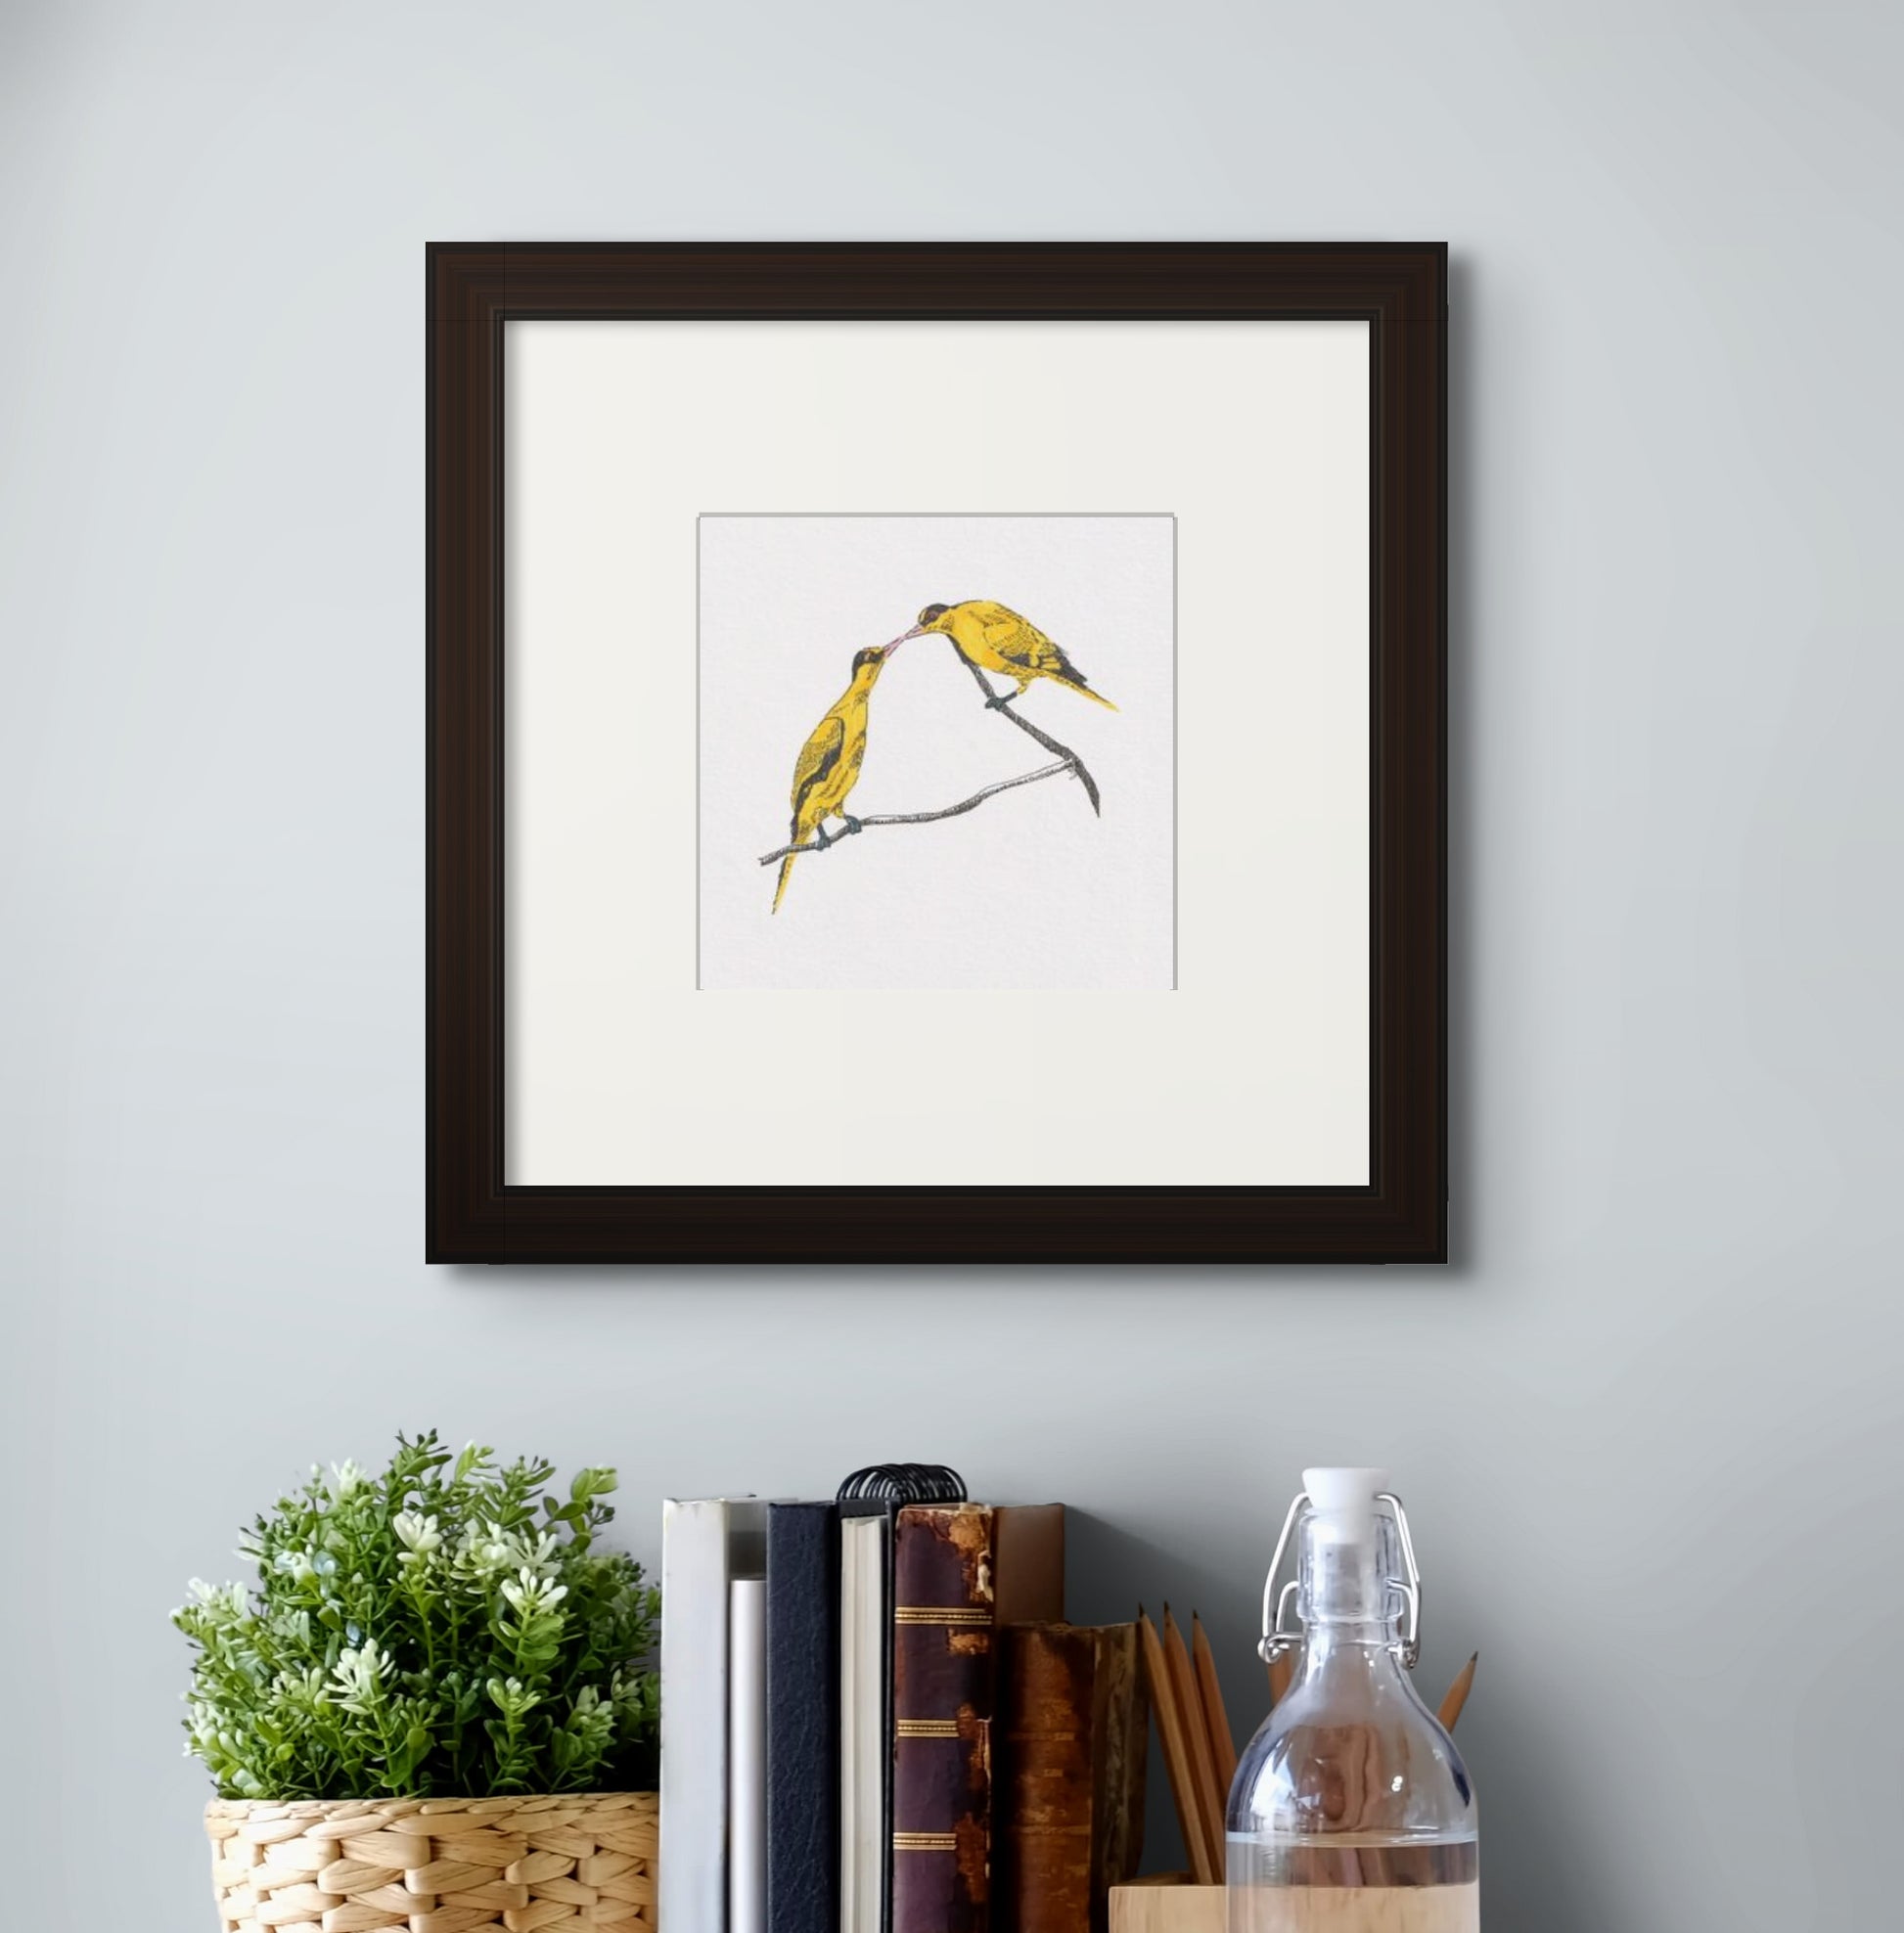 6” x 6” giclée art print of line drawing with coloured brush pen drawing of a pair of yellow oriole birds, with their beaks touching. In a black frame and cream colour mat. Hung above a work desk table top.